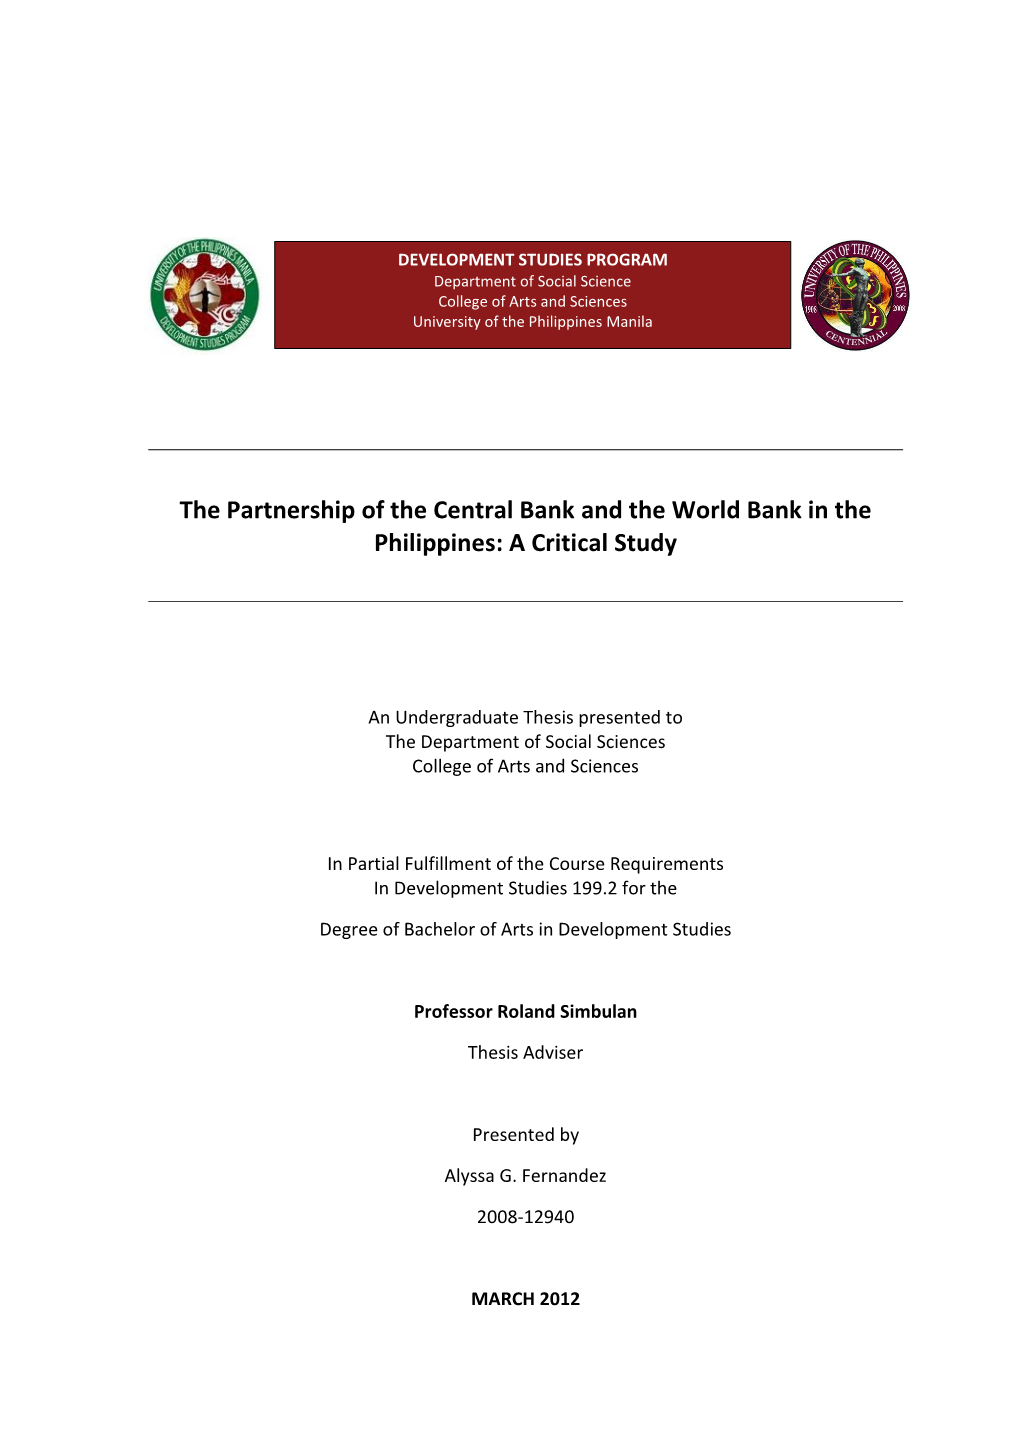 The Partnership of the Central Bank and the World Bank in the Philippines: a Critical Study